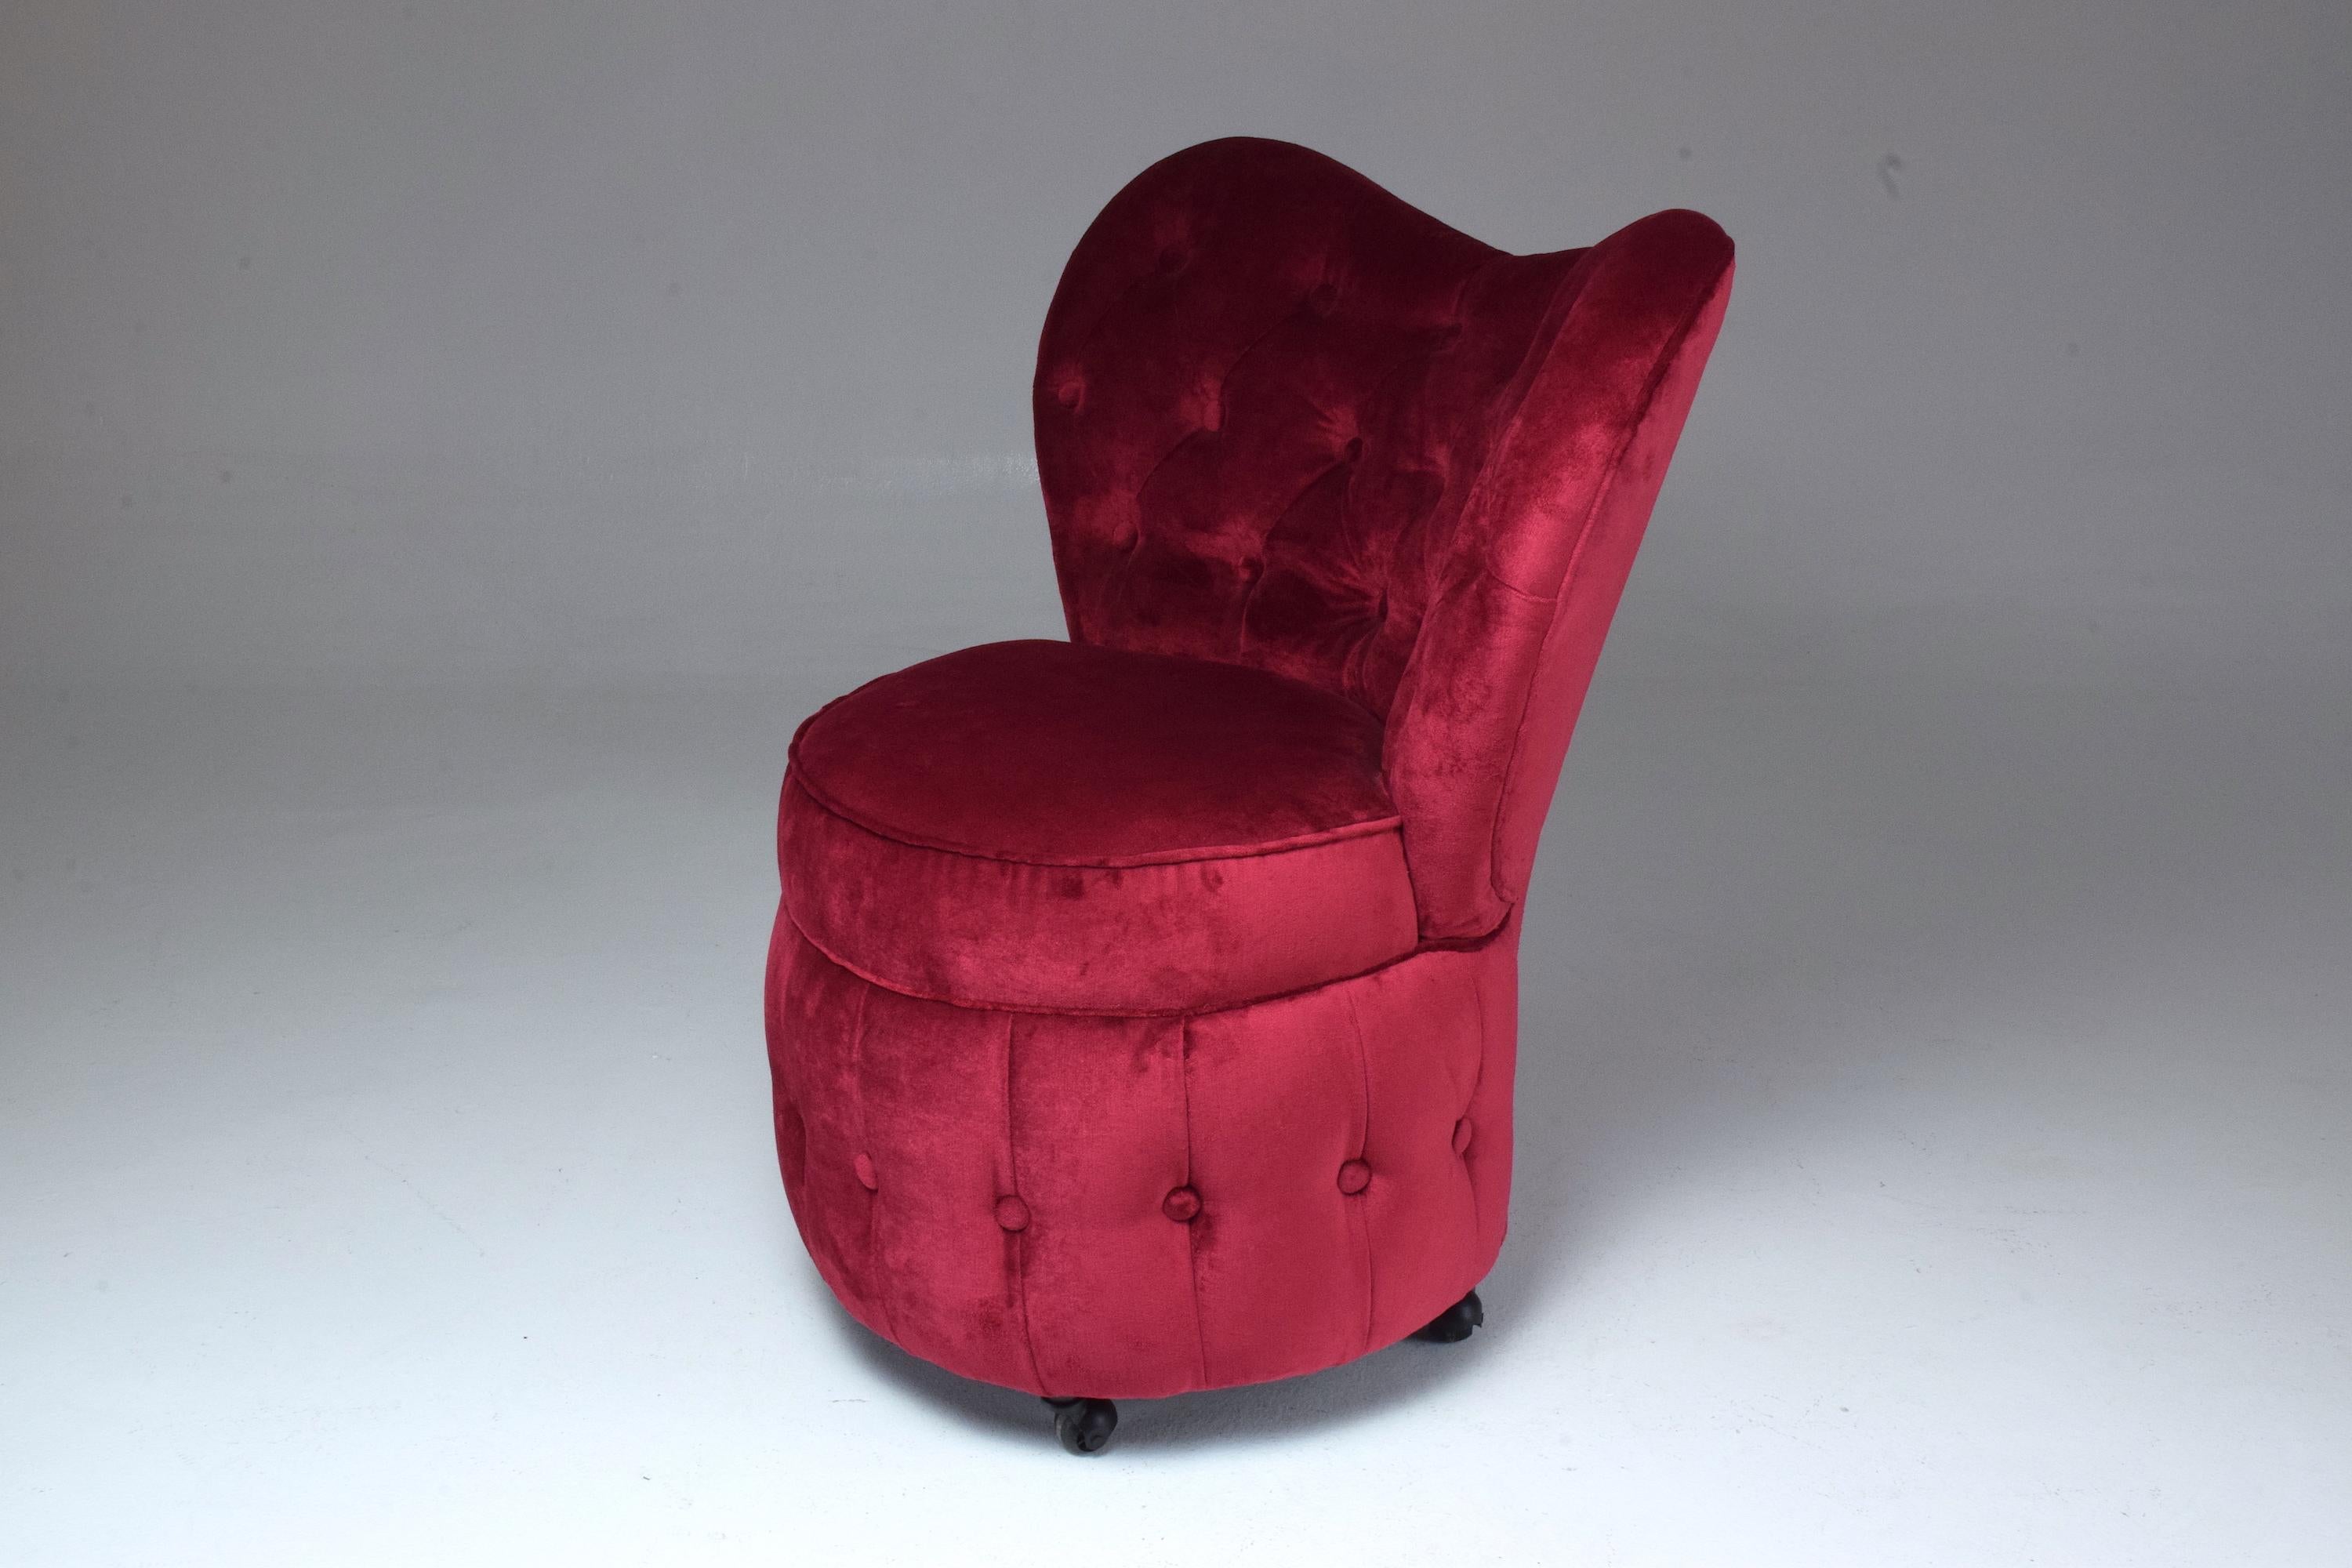 20th century vintage boudoir vanity chair in designed with a heart shaped curved backrest, quilted fabric and soft round cushion. In fully restored condition with Lelièvre Paris red velvet fabric.
We added black rollers for functionality.
France,